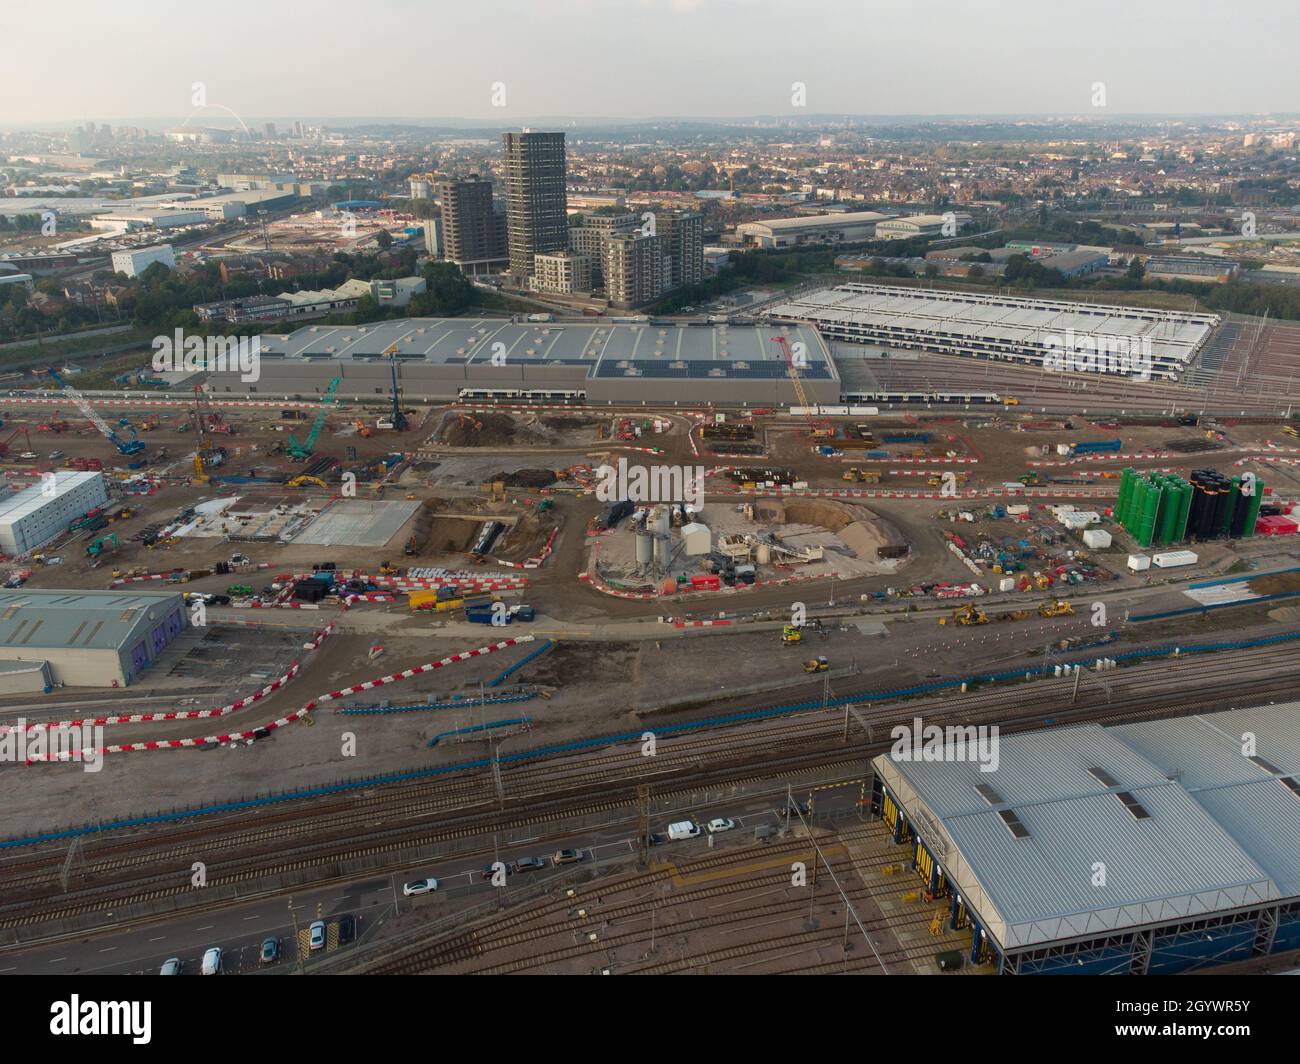 Old Oak Common, HS2 High Speed Two railway station construction site Stock Photo